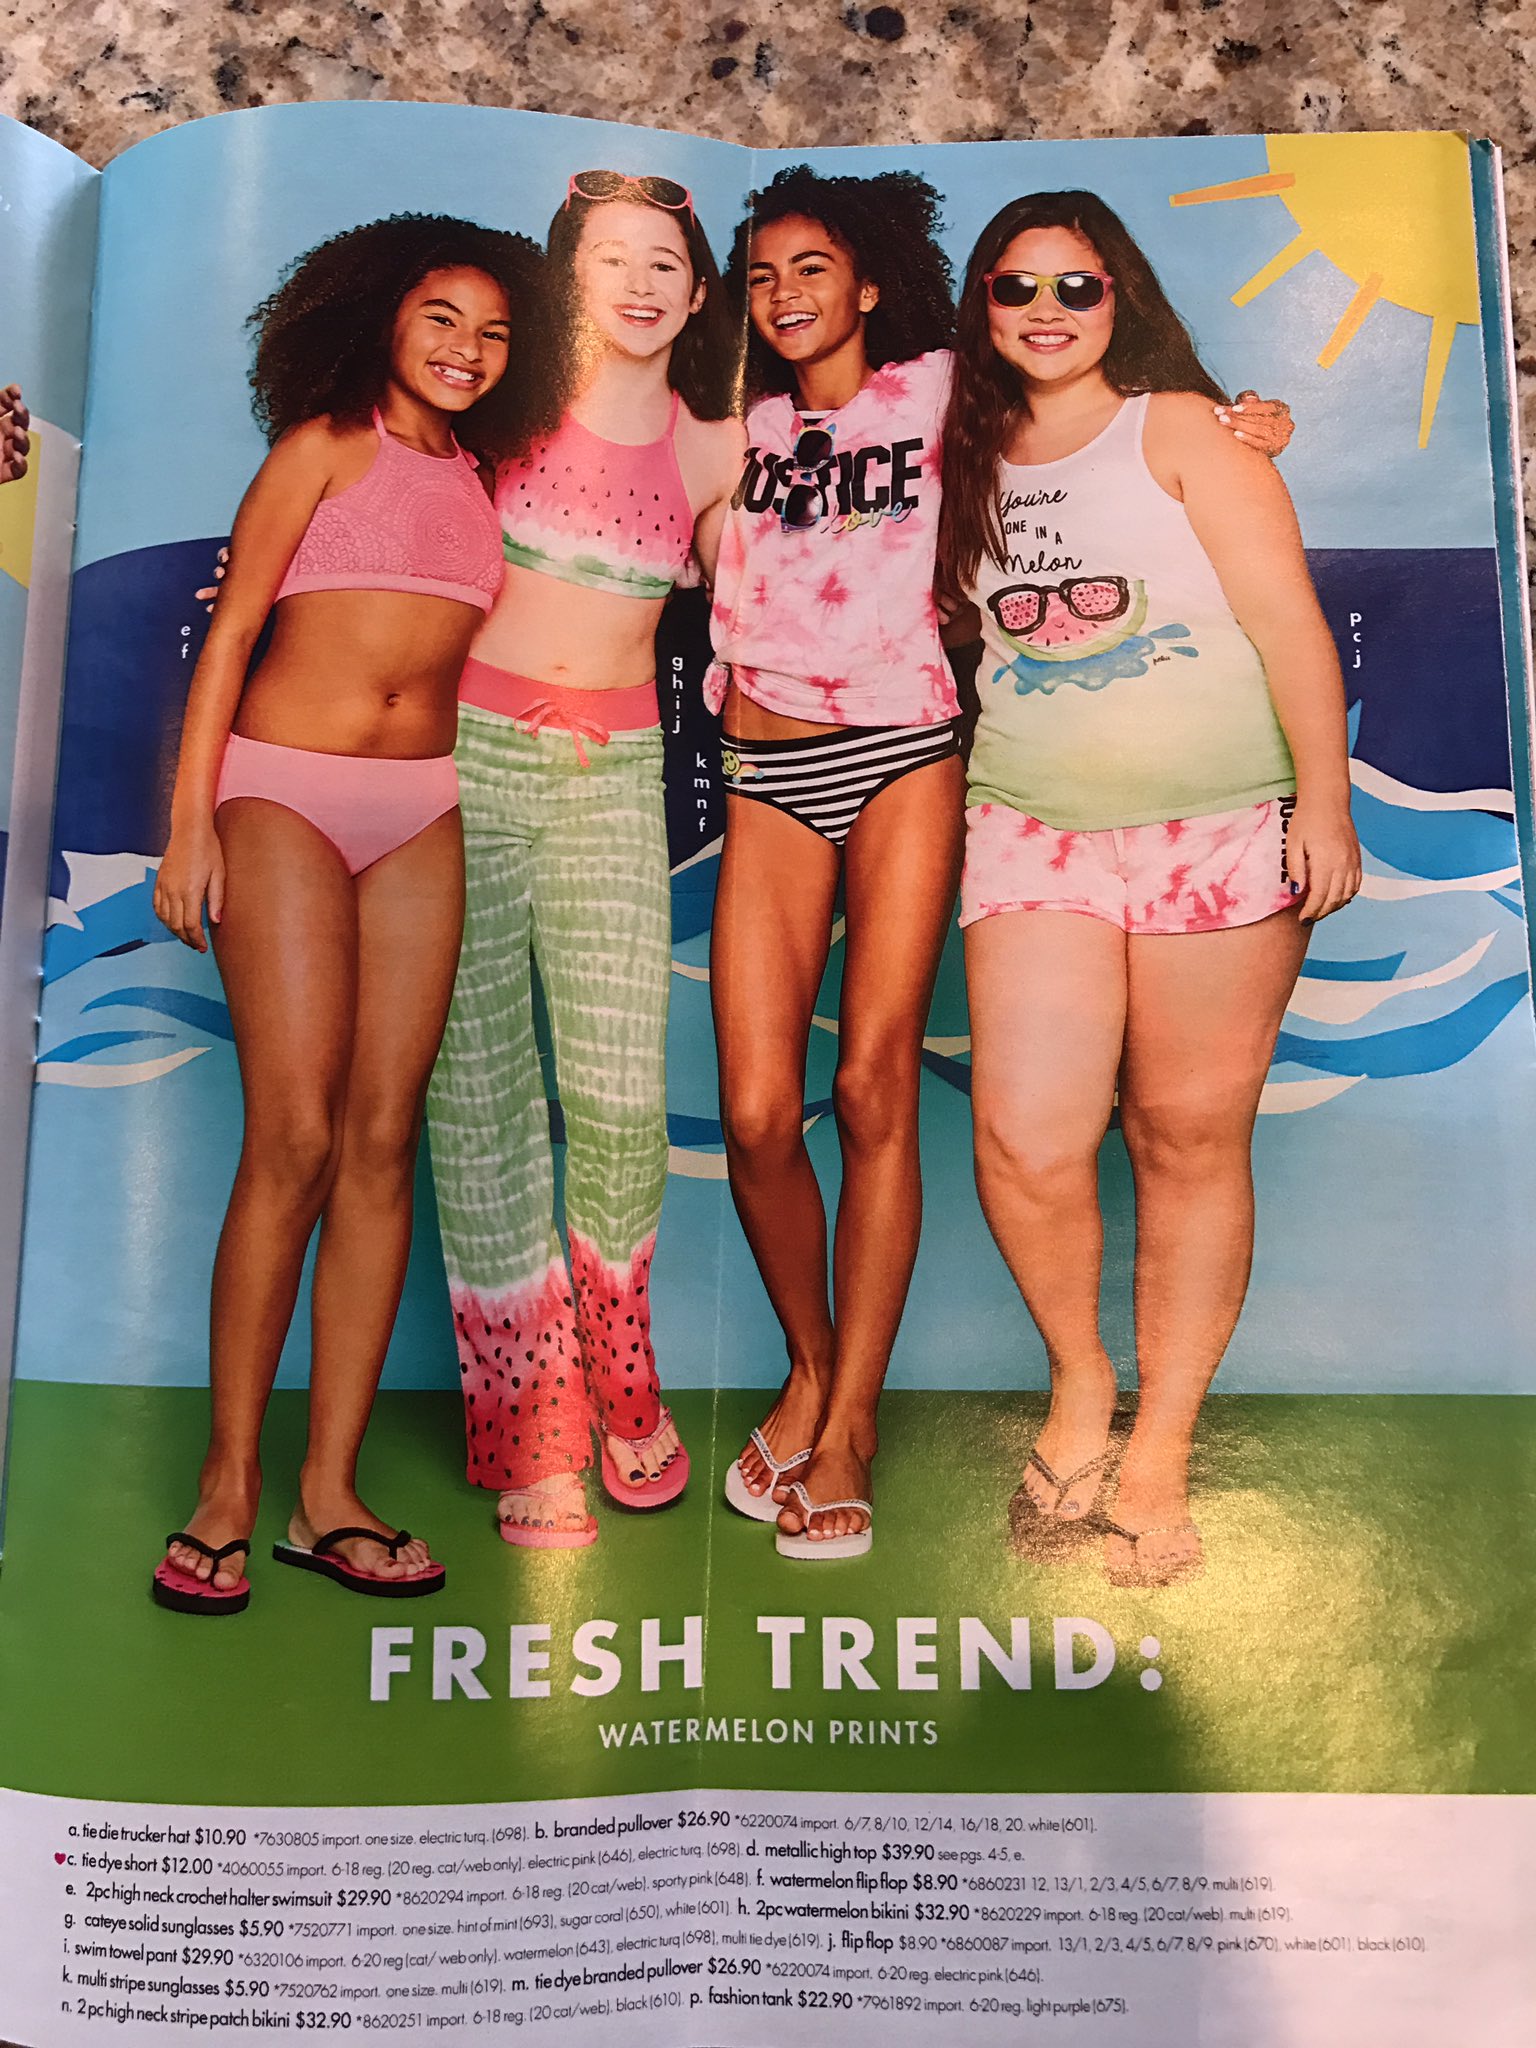 Mrs. Schnelle on X: Opened up this Justice Catalog to find a plus size  model. #verynice #allshapesallsizes #bodyimage  / X